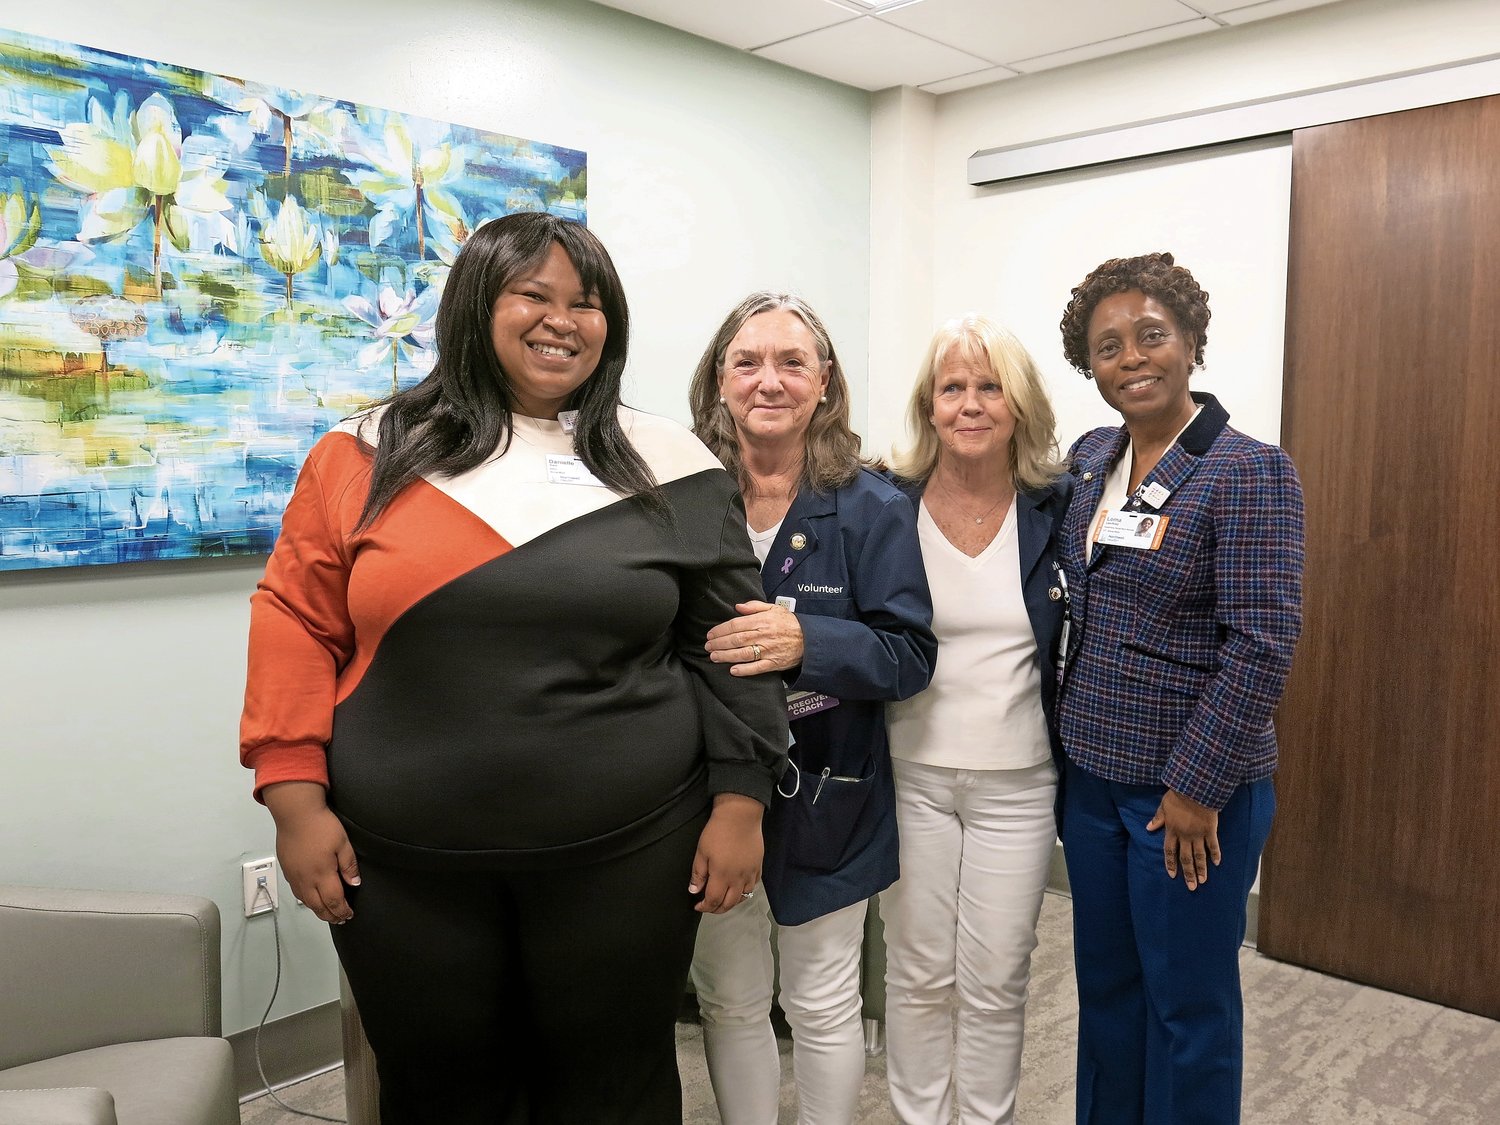 Danielle Kerr, a social work intern from Adelphi, far left, volunteer caregiver coaches Christine Mills and Nancy White, and Lorna Lee-Riley, Glen Cove Hospital’s senior social worker, in one of the rooms at the new Caregiver Center.